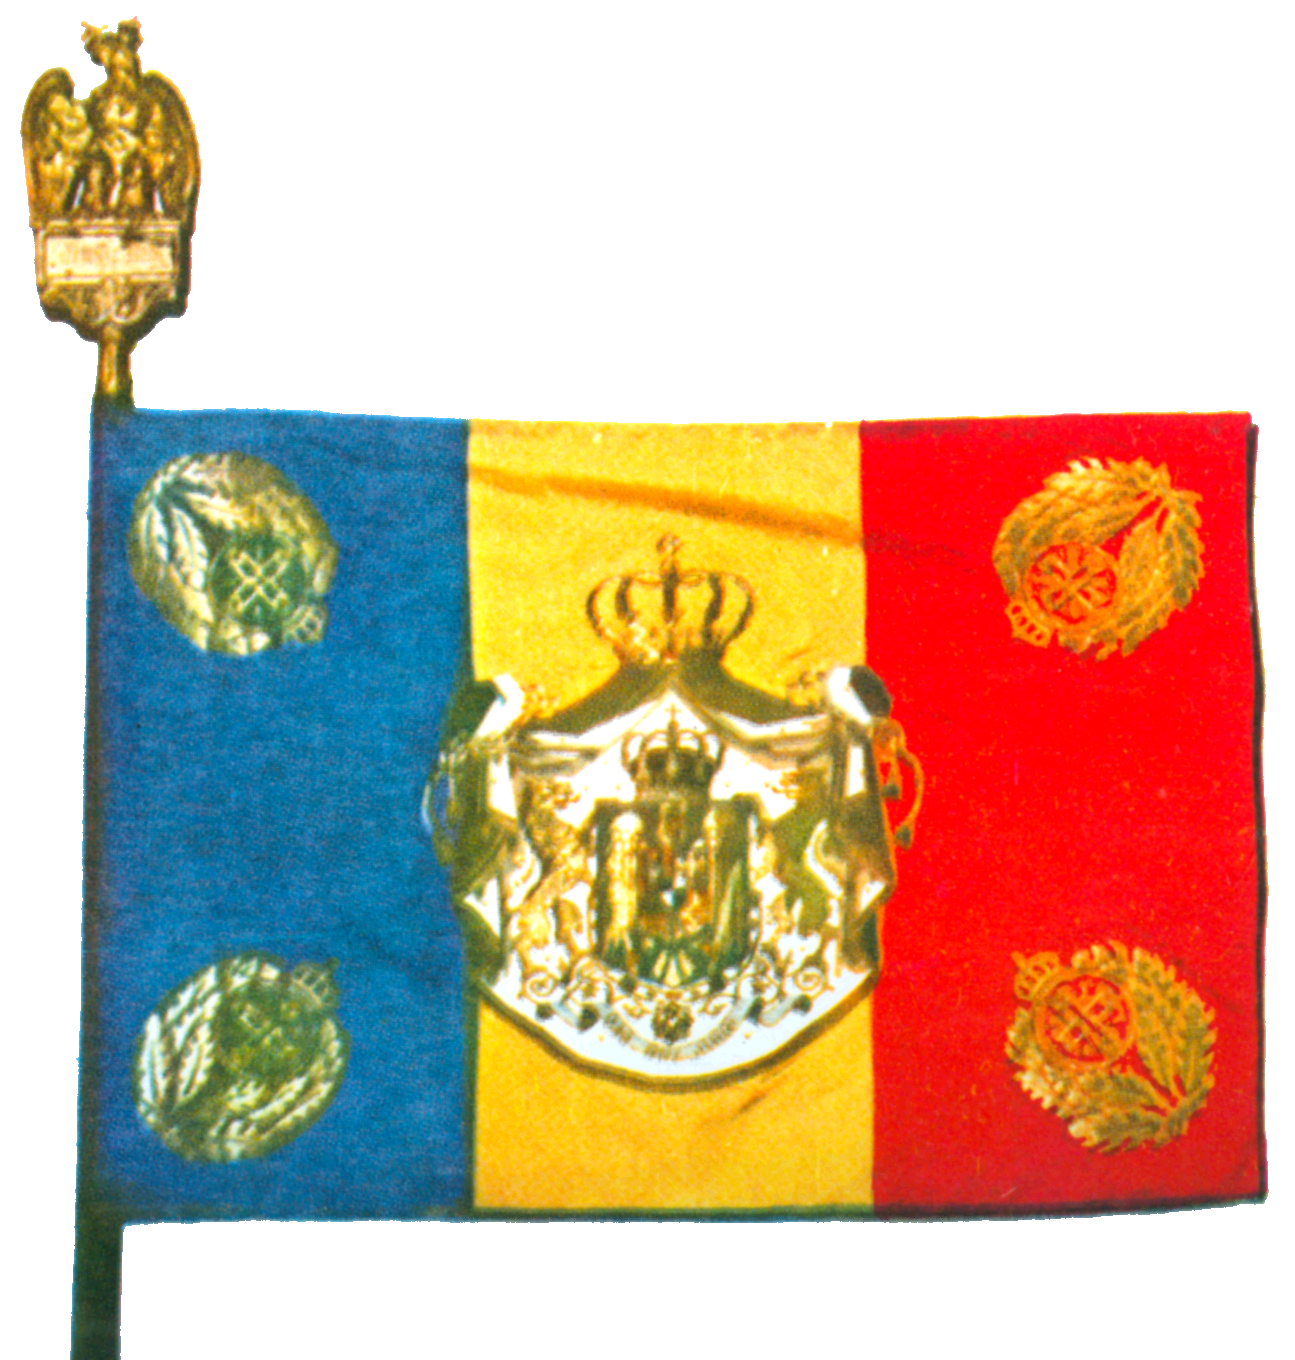 http://upload.wikimedia.org/wikipedia/commons/3/39/Romanian_Army_flag_%28WWII%2C_Mihai_I_model%29.png